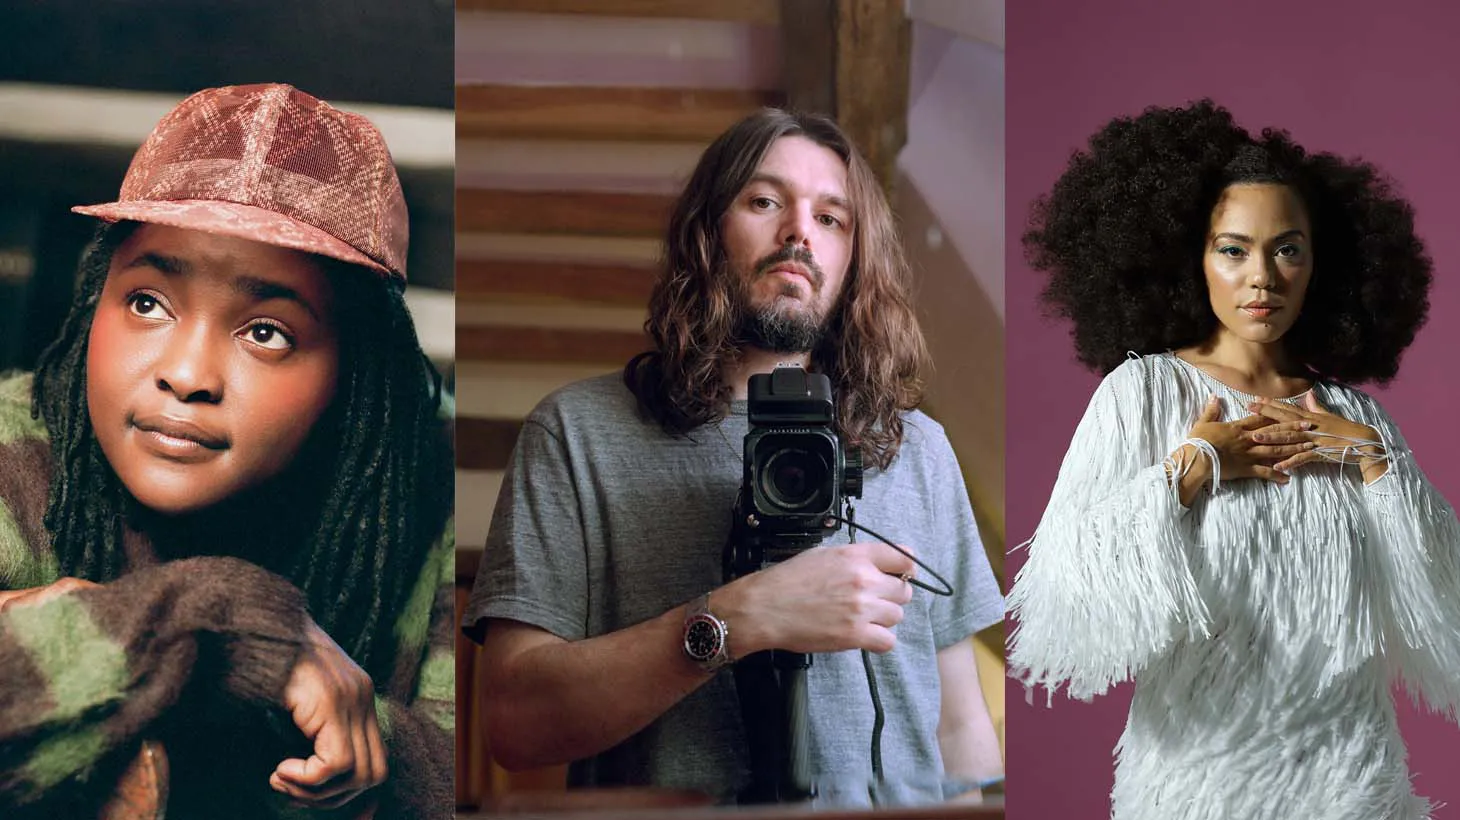 Lean in for engaging new work from Joy Oladokun, Bibio, and Madison McFerrin.